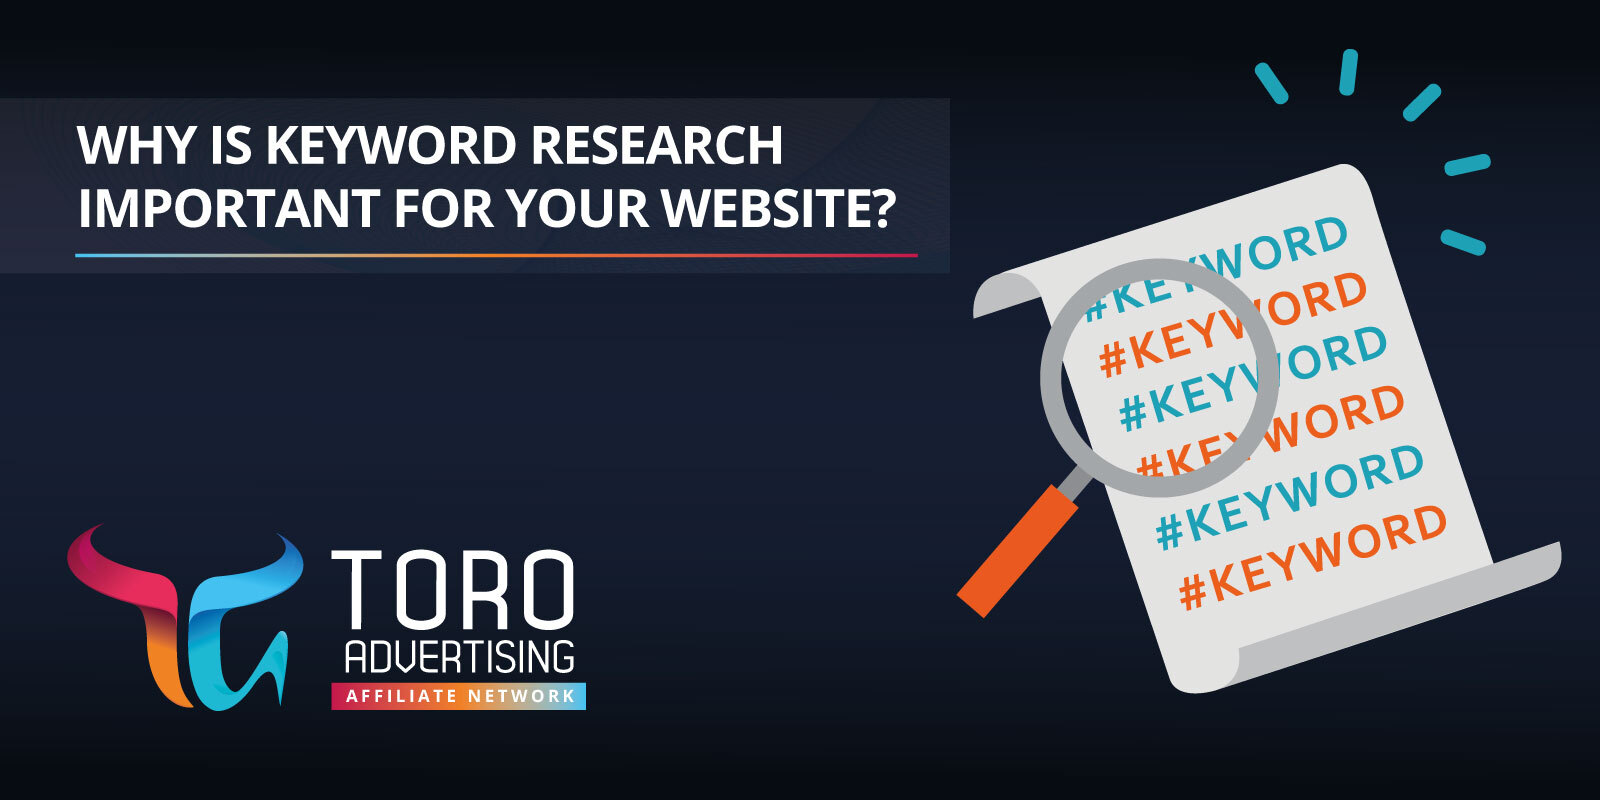 Why is keyword research important for your website?